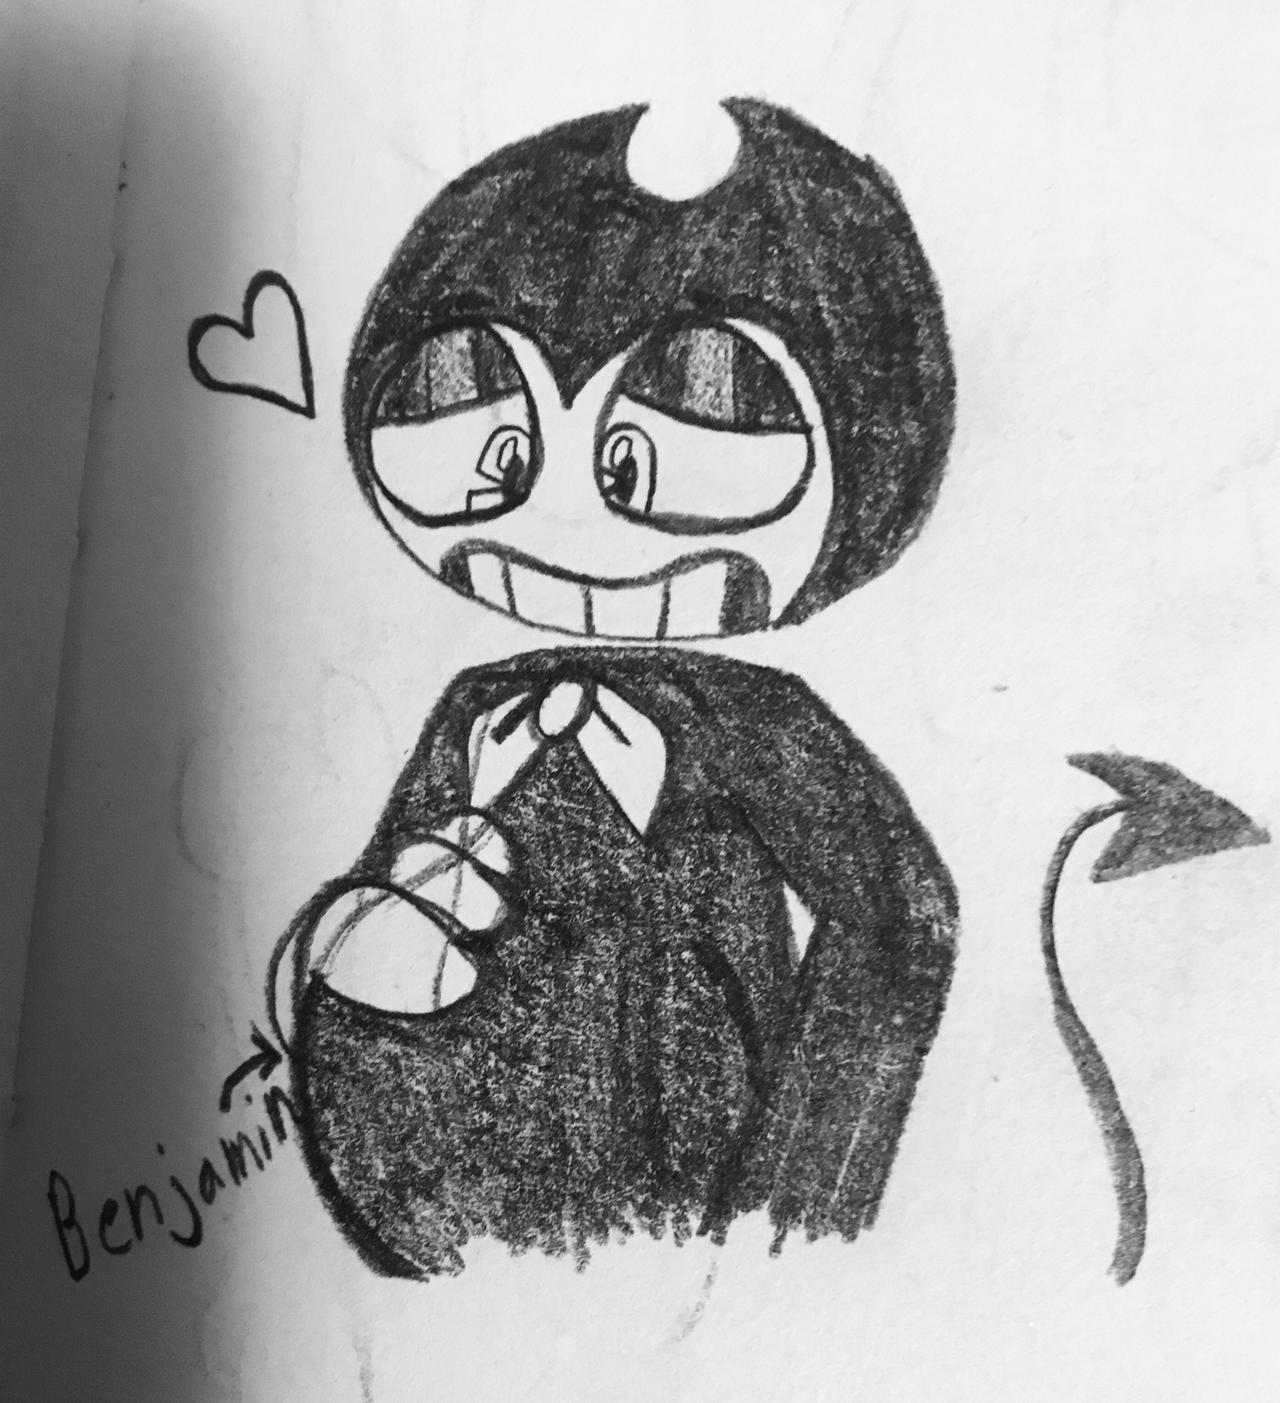 Bendy and inside with Benjamin by Ced145 on DeviantArt